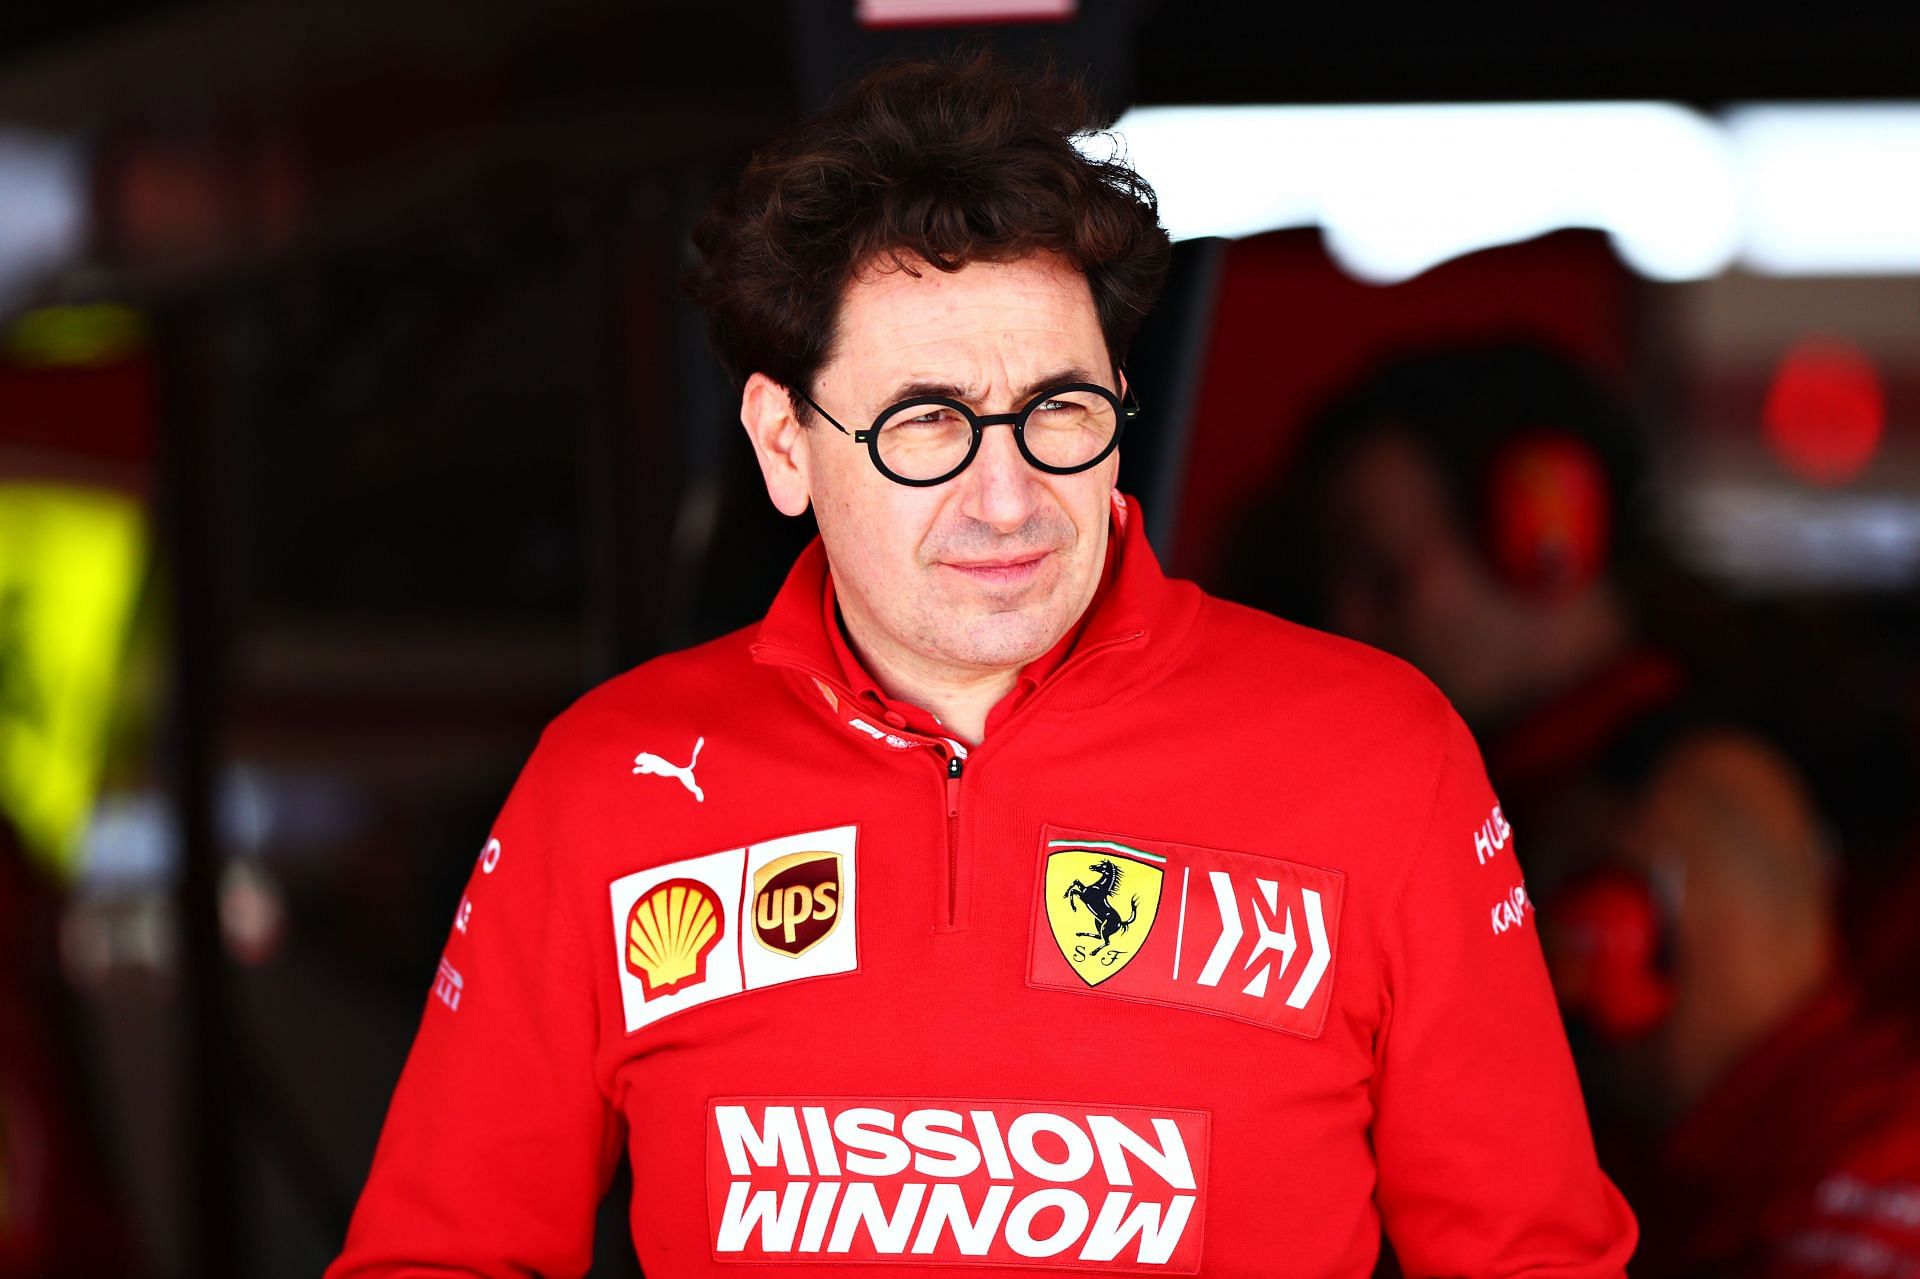 Ferrari were involved in an agreement with FIA after a new technical directive was issued at the start of the 2020 F1 season